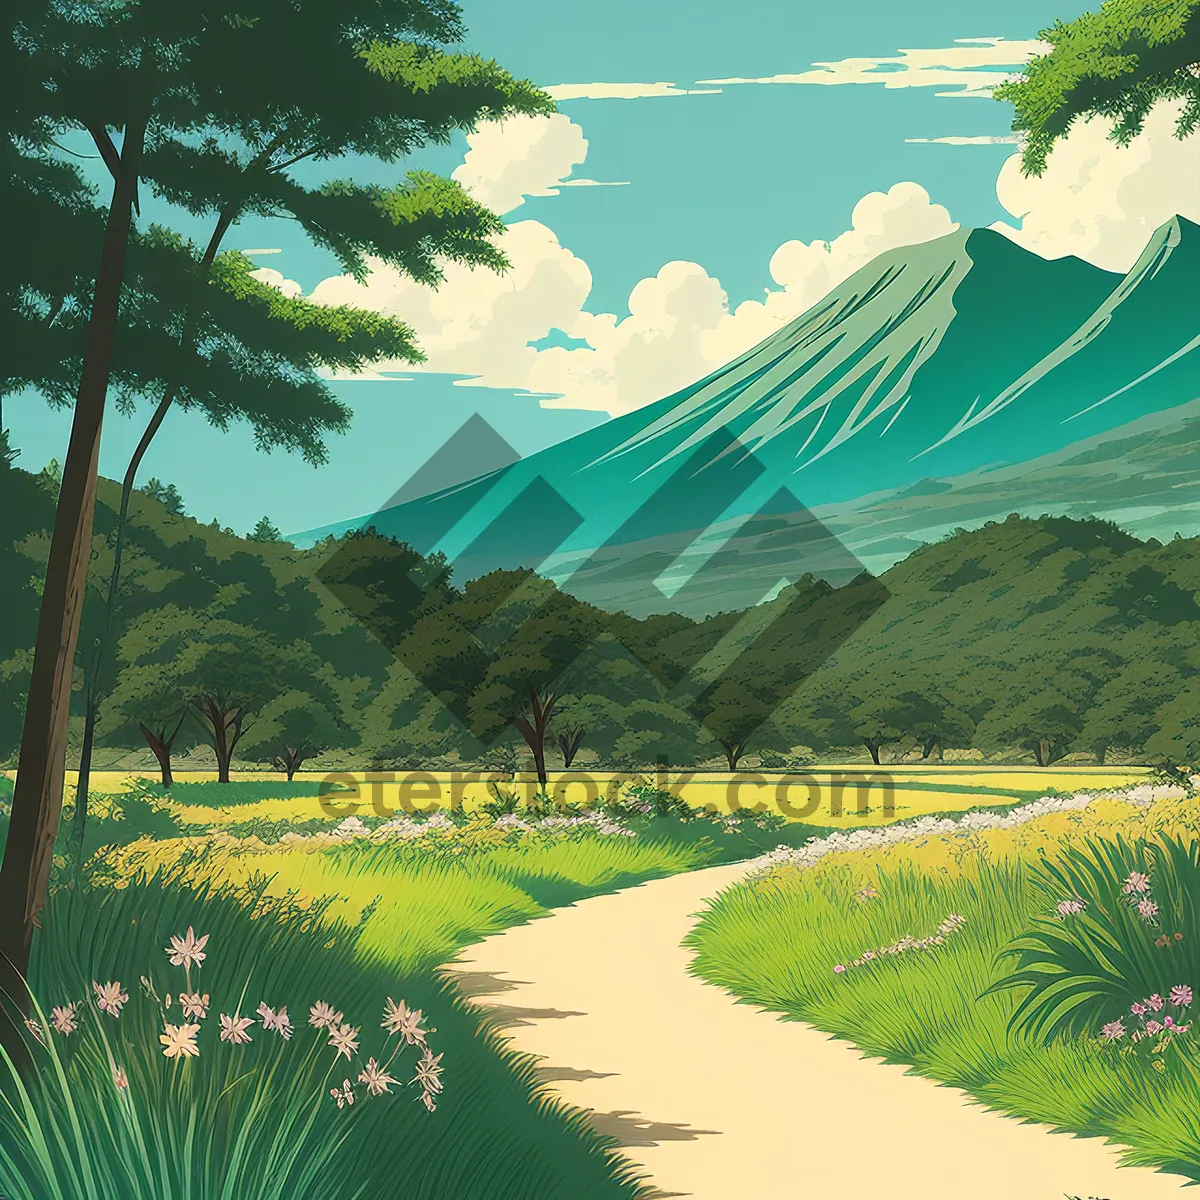 Picture of Picturesque summer landscape filled with sunlit meadows and majestic mountains